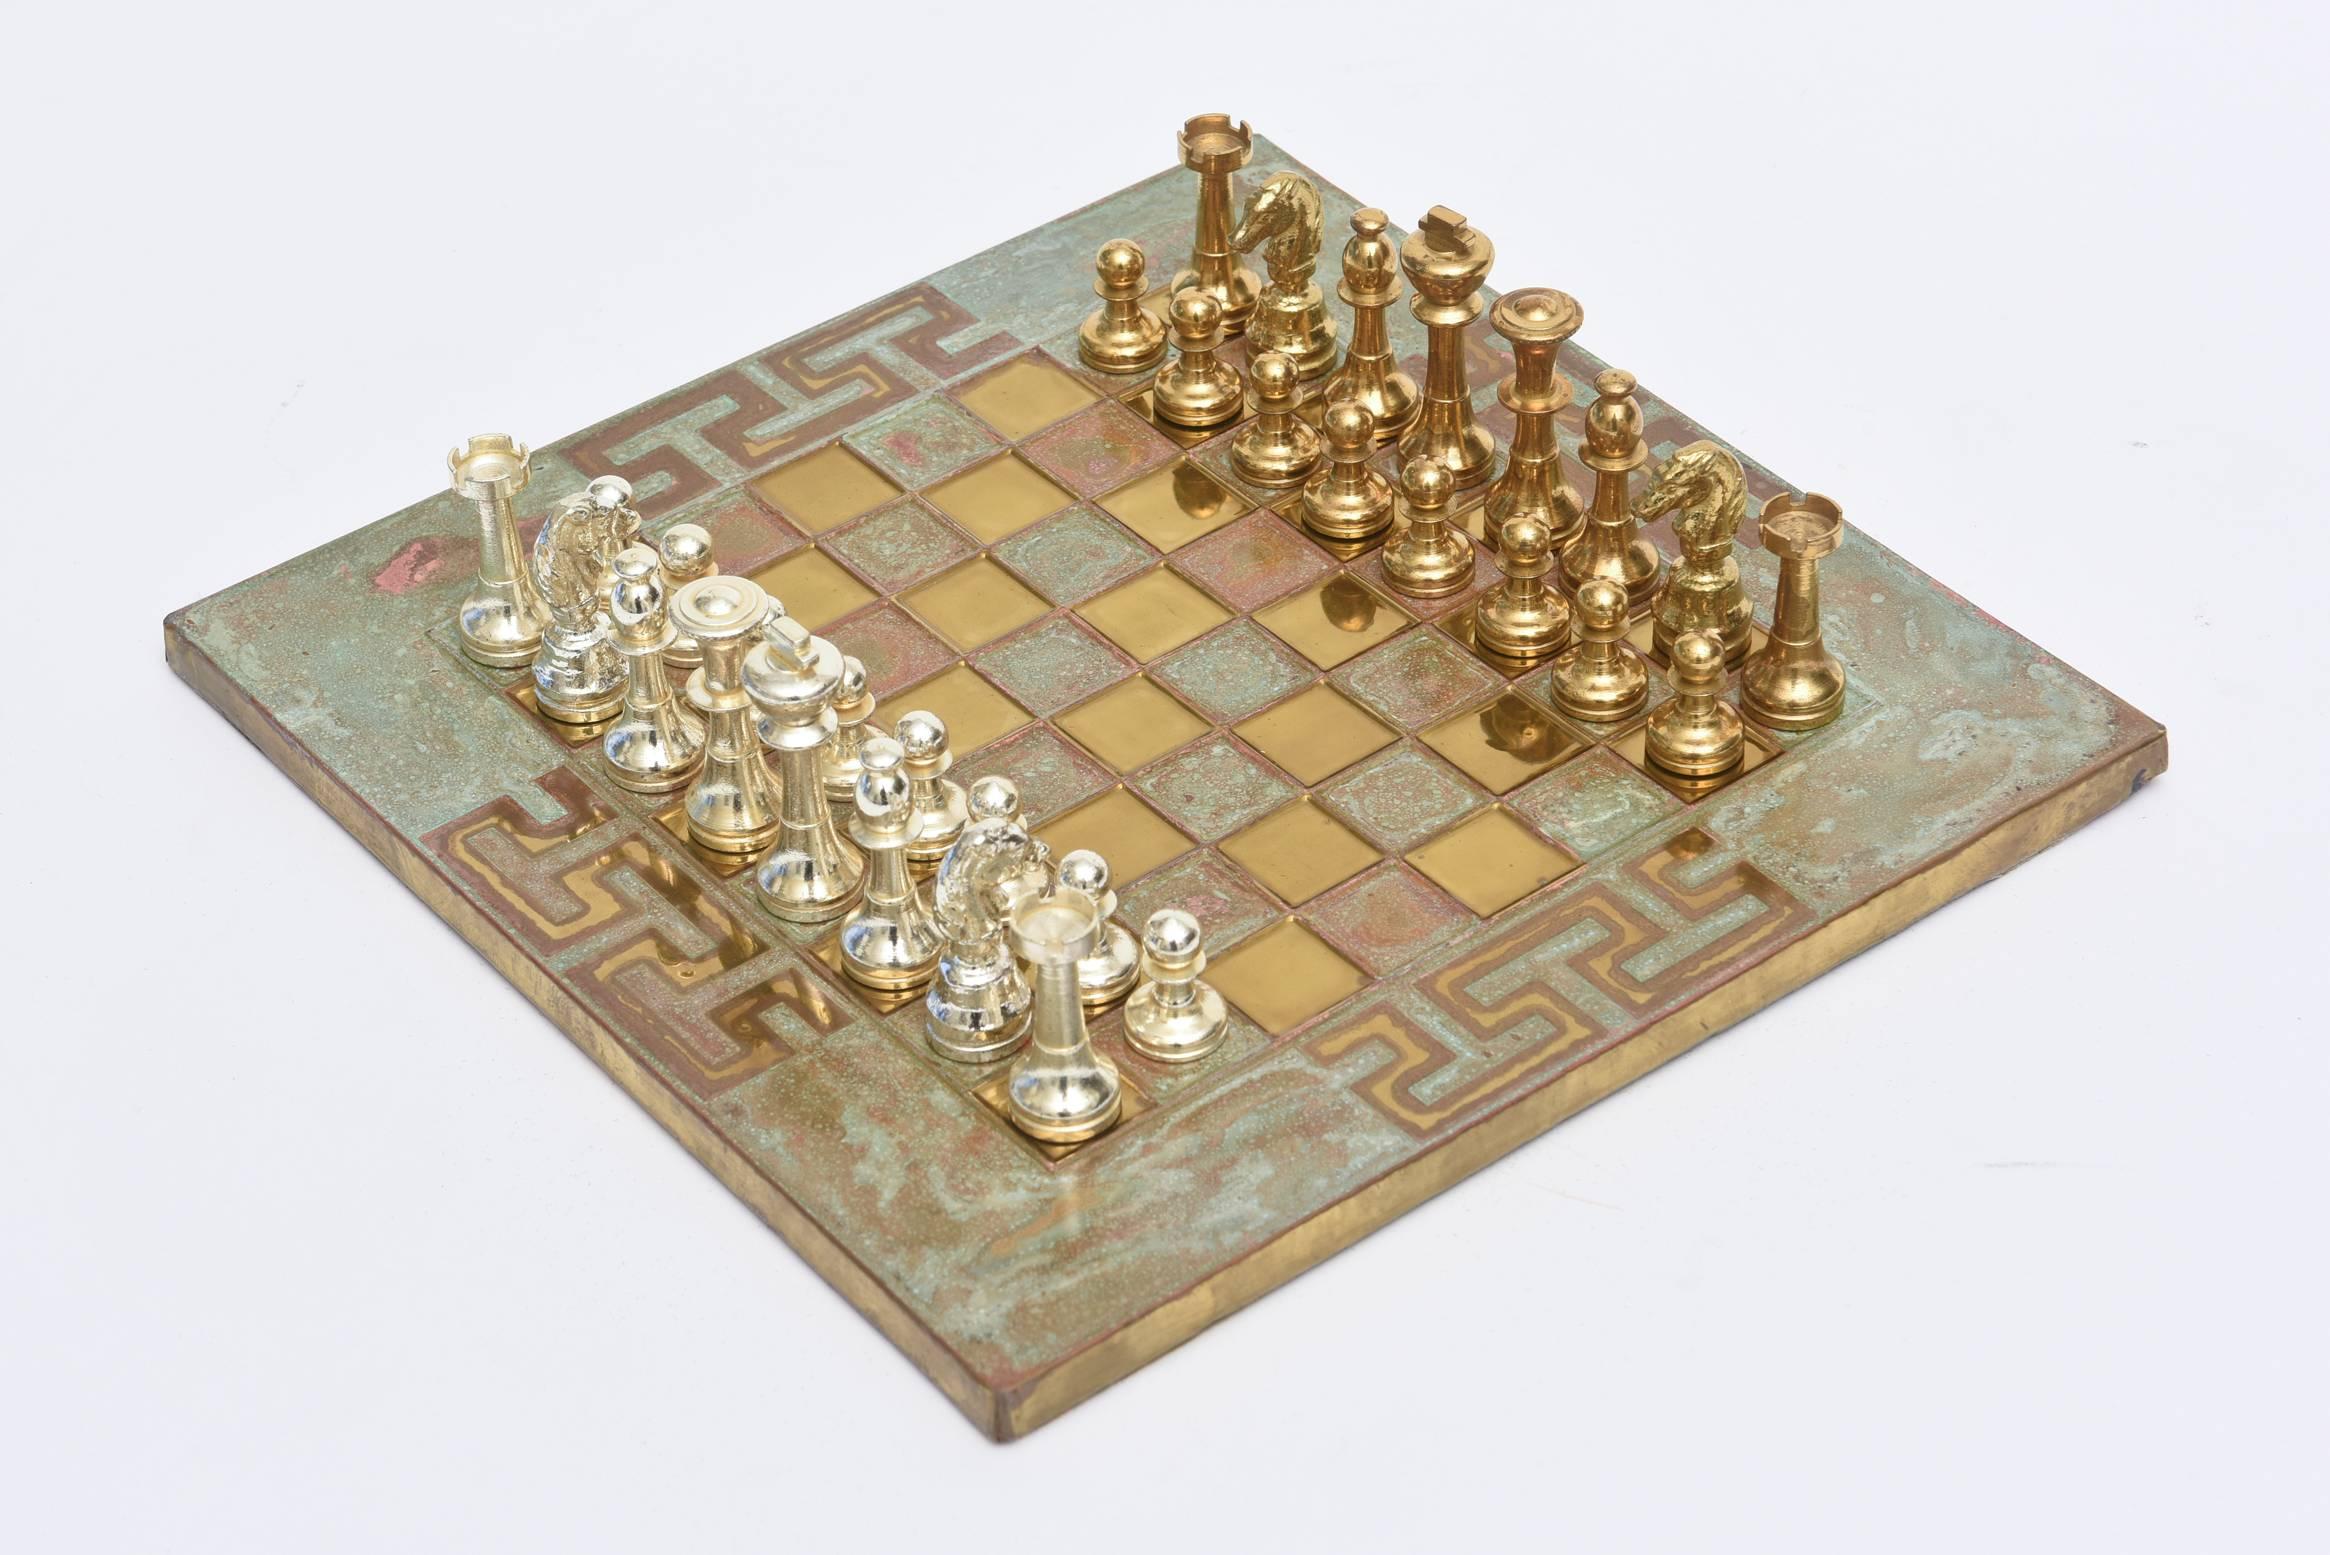 These signed small vintage Greek chess set has the modernist yet Classic Greek key pattern. Signed Forma Greece. It is Mid-Century Modern.
The players are a combination of chrome and brass. The board is a patinated brass and copper over wood with a